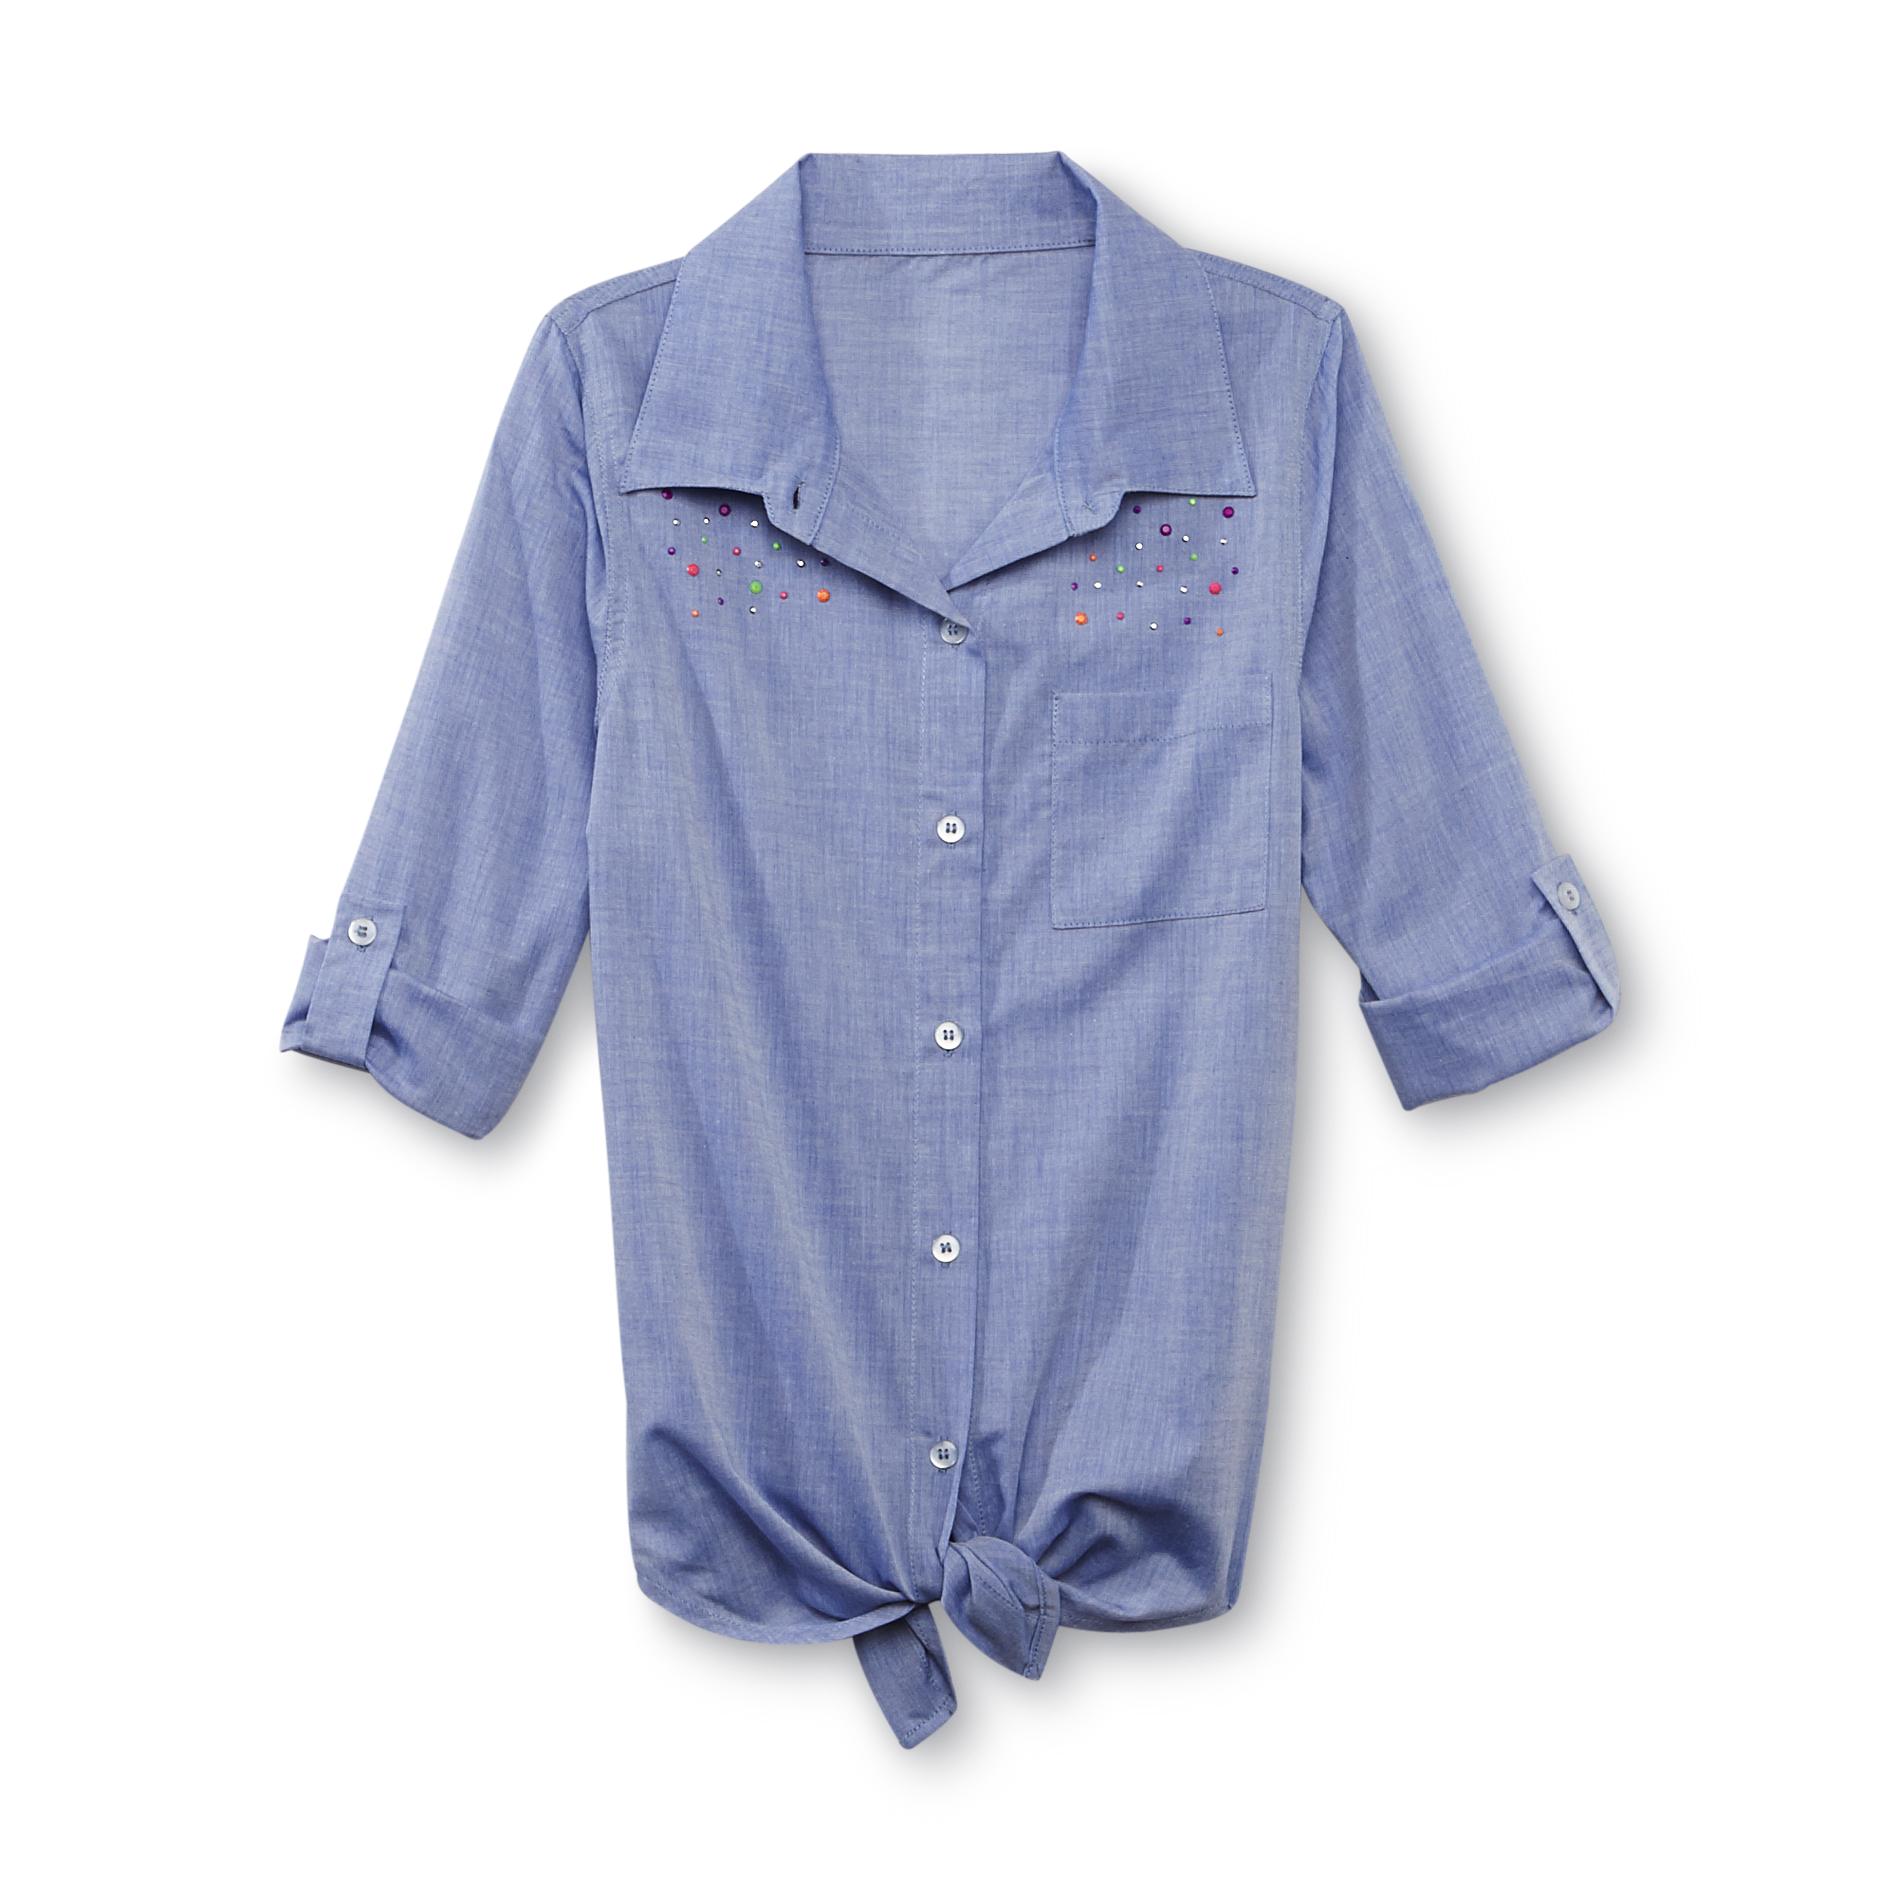 Route 66 Girl's Tie-Front Chambray Shirt